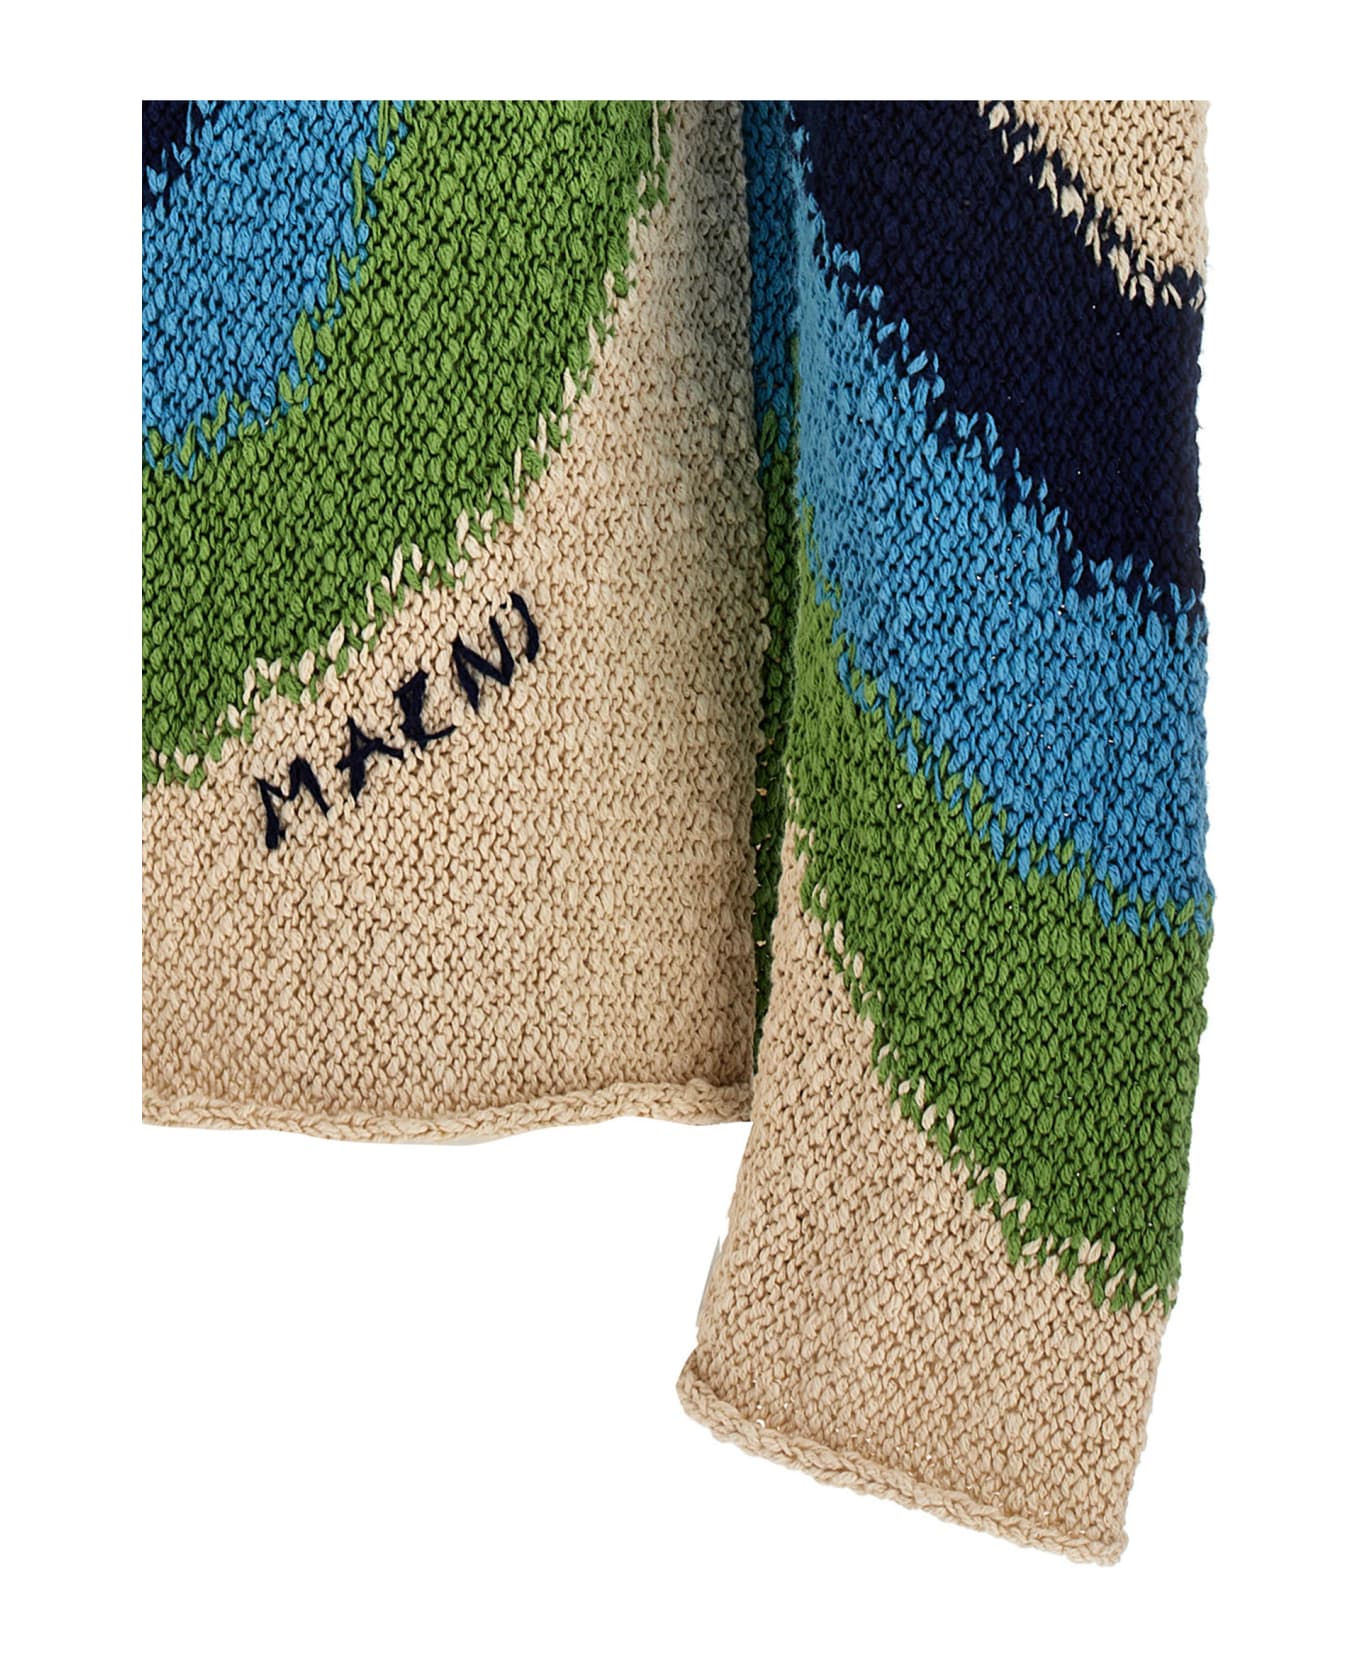 Marni Patterned Hooded Sweater - POWDERBLUE